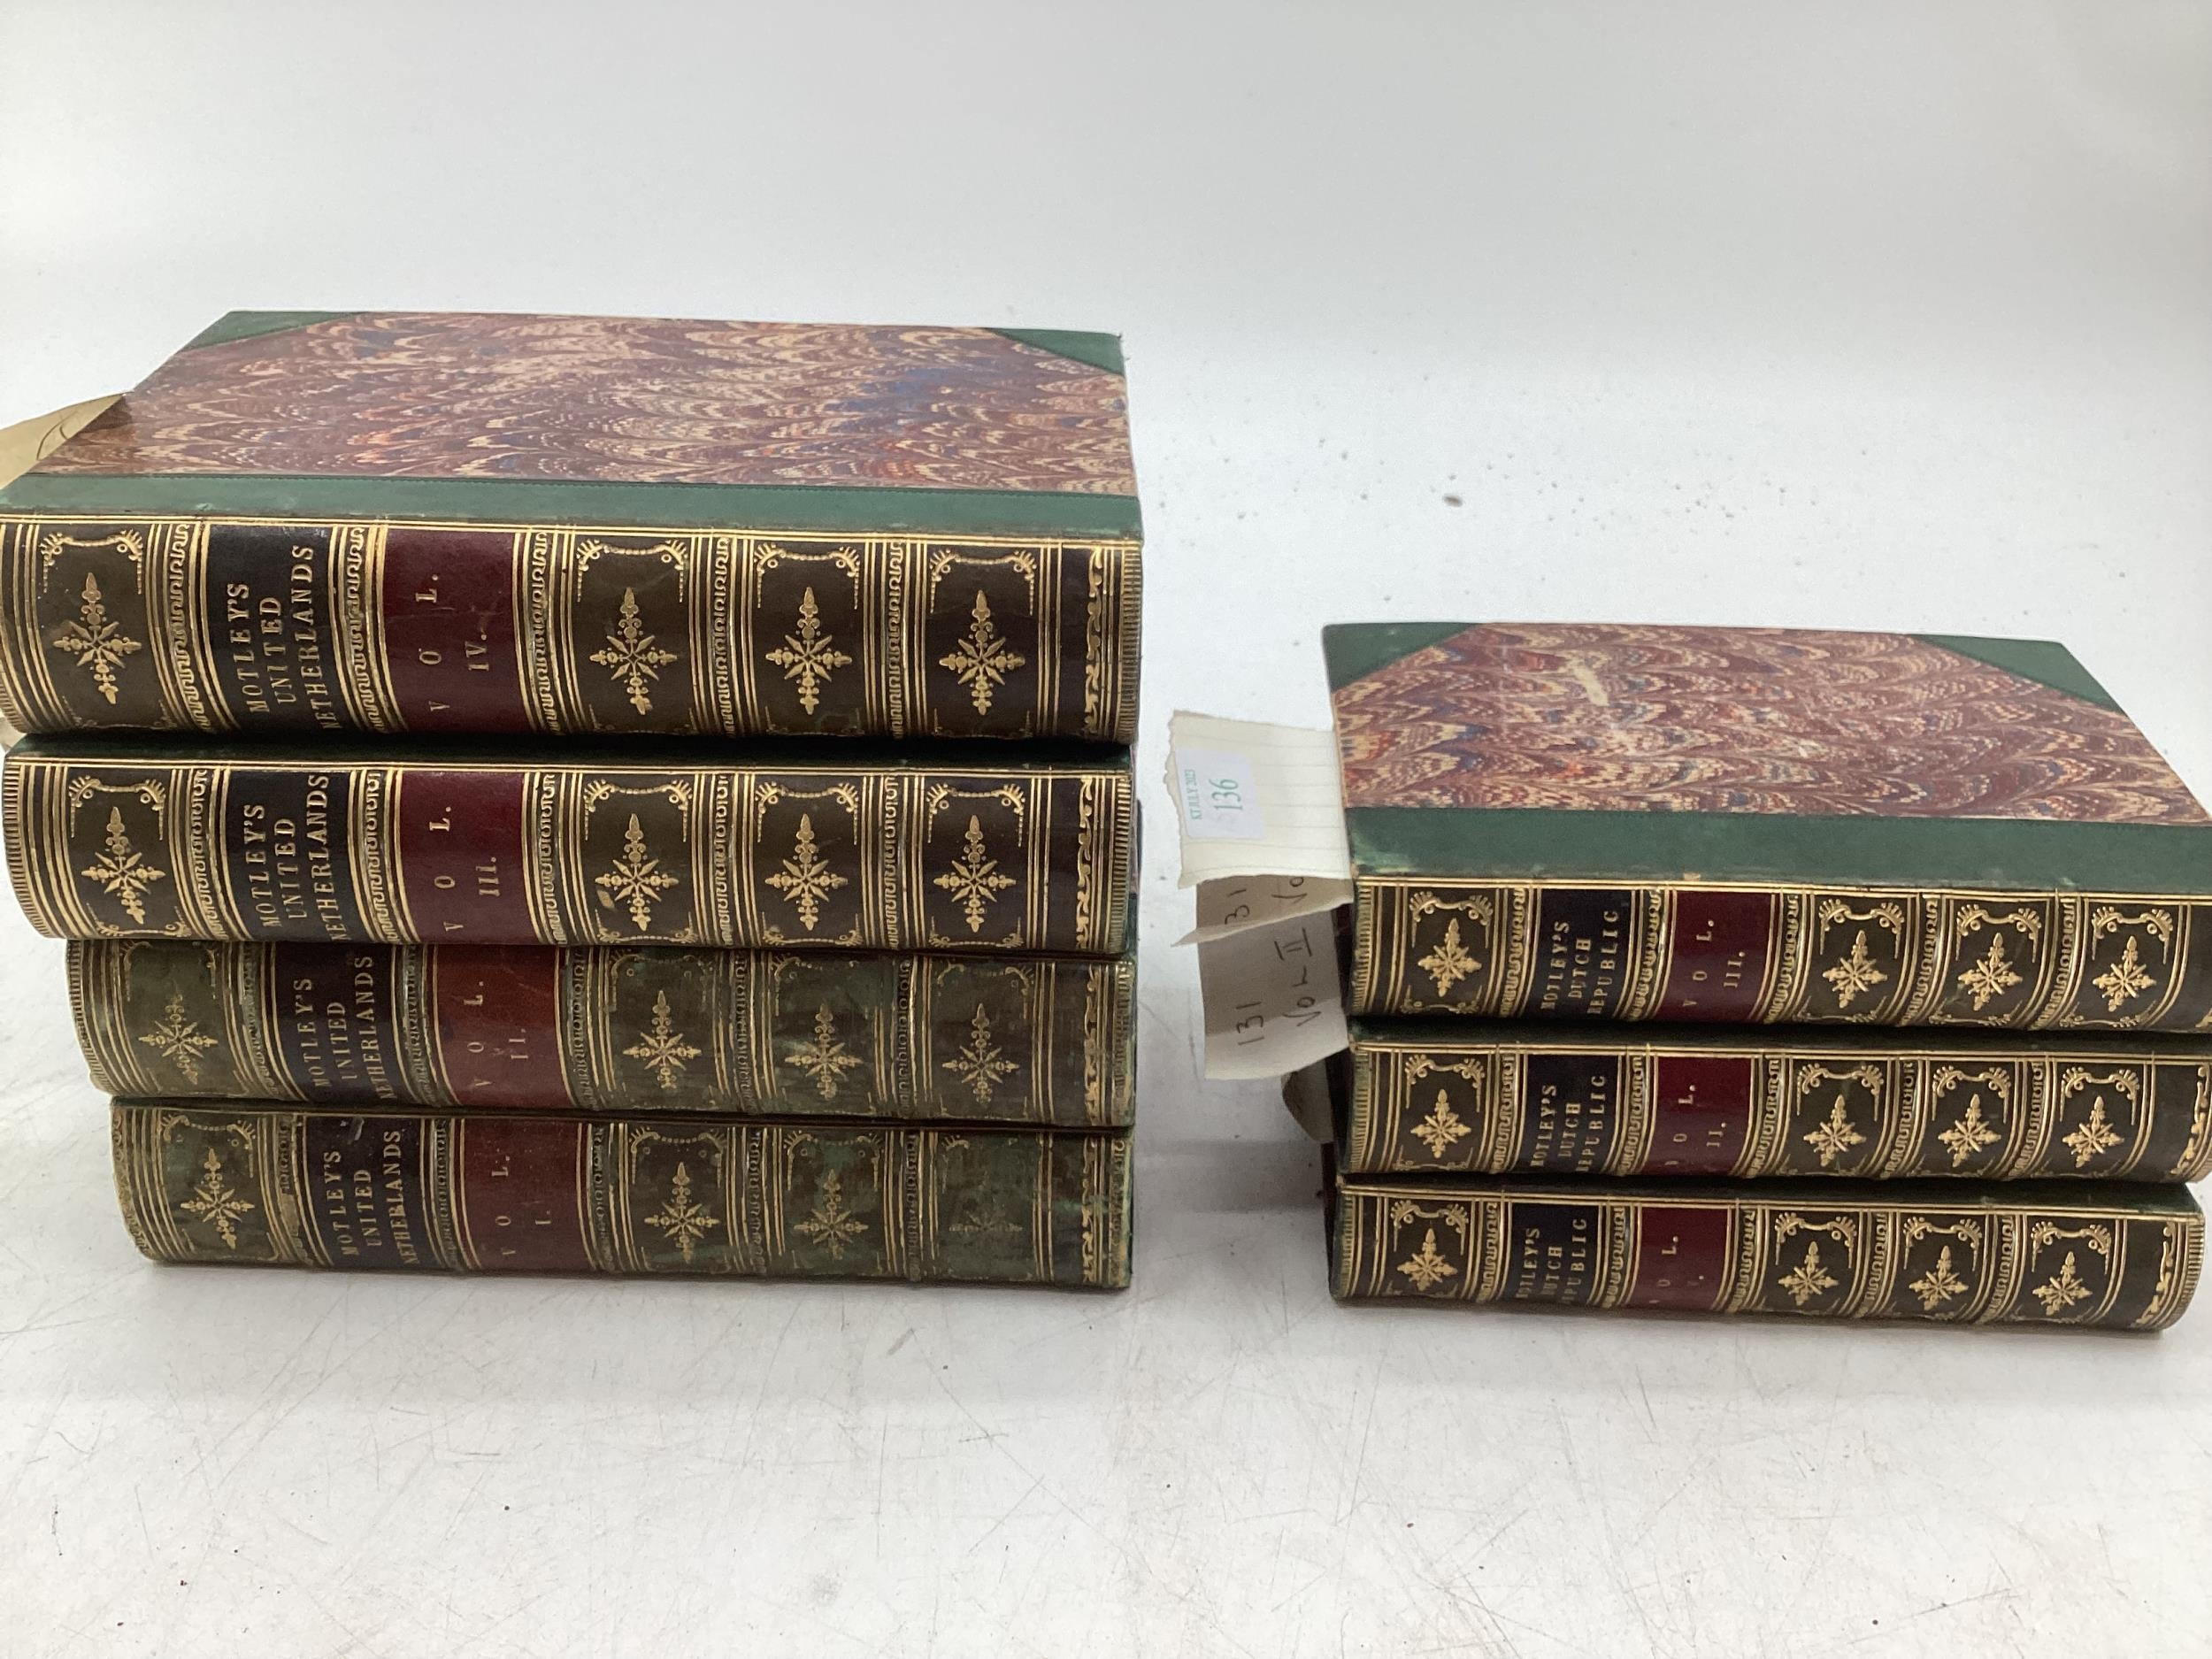 Books, Motley's United Netherlands, pub John Murray London 1860 in 4 Volumes together with Motley'